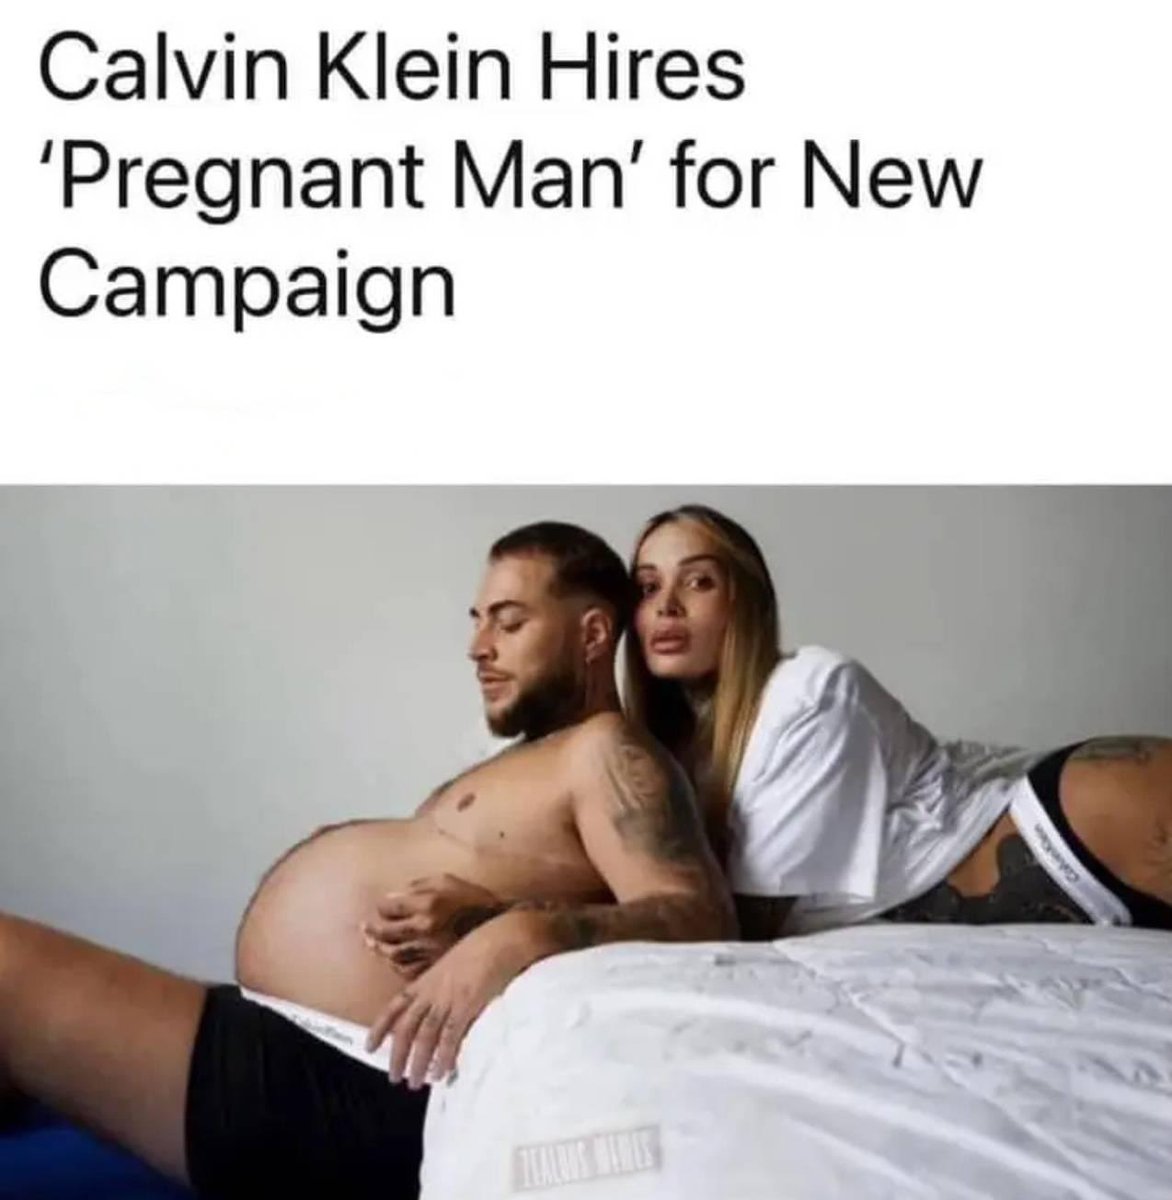 Ok these big corporations don’t care about anything but their own evil agenda. Nothing they do will convince me that a man can have a baby through his butt hole.